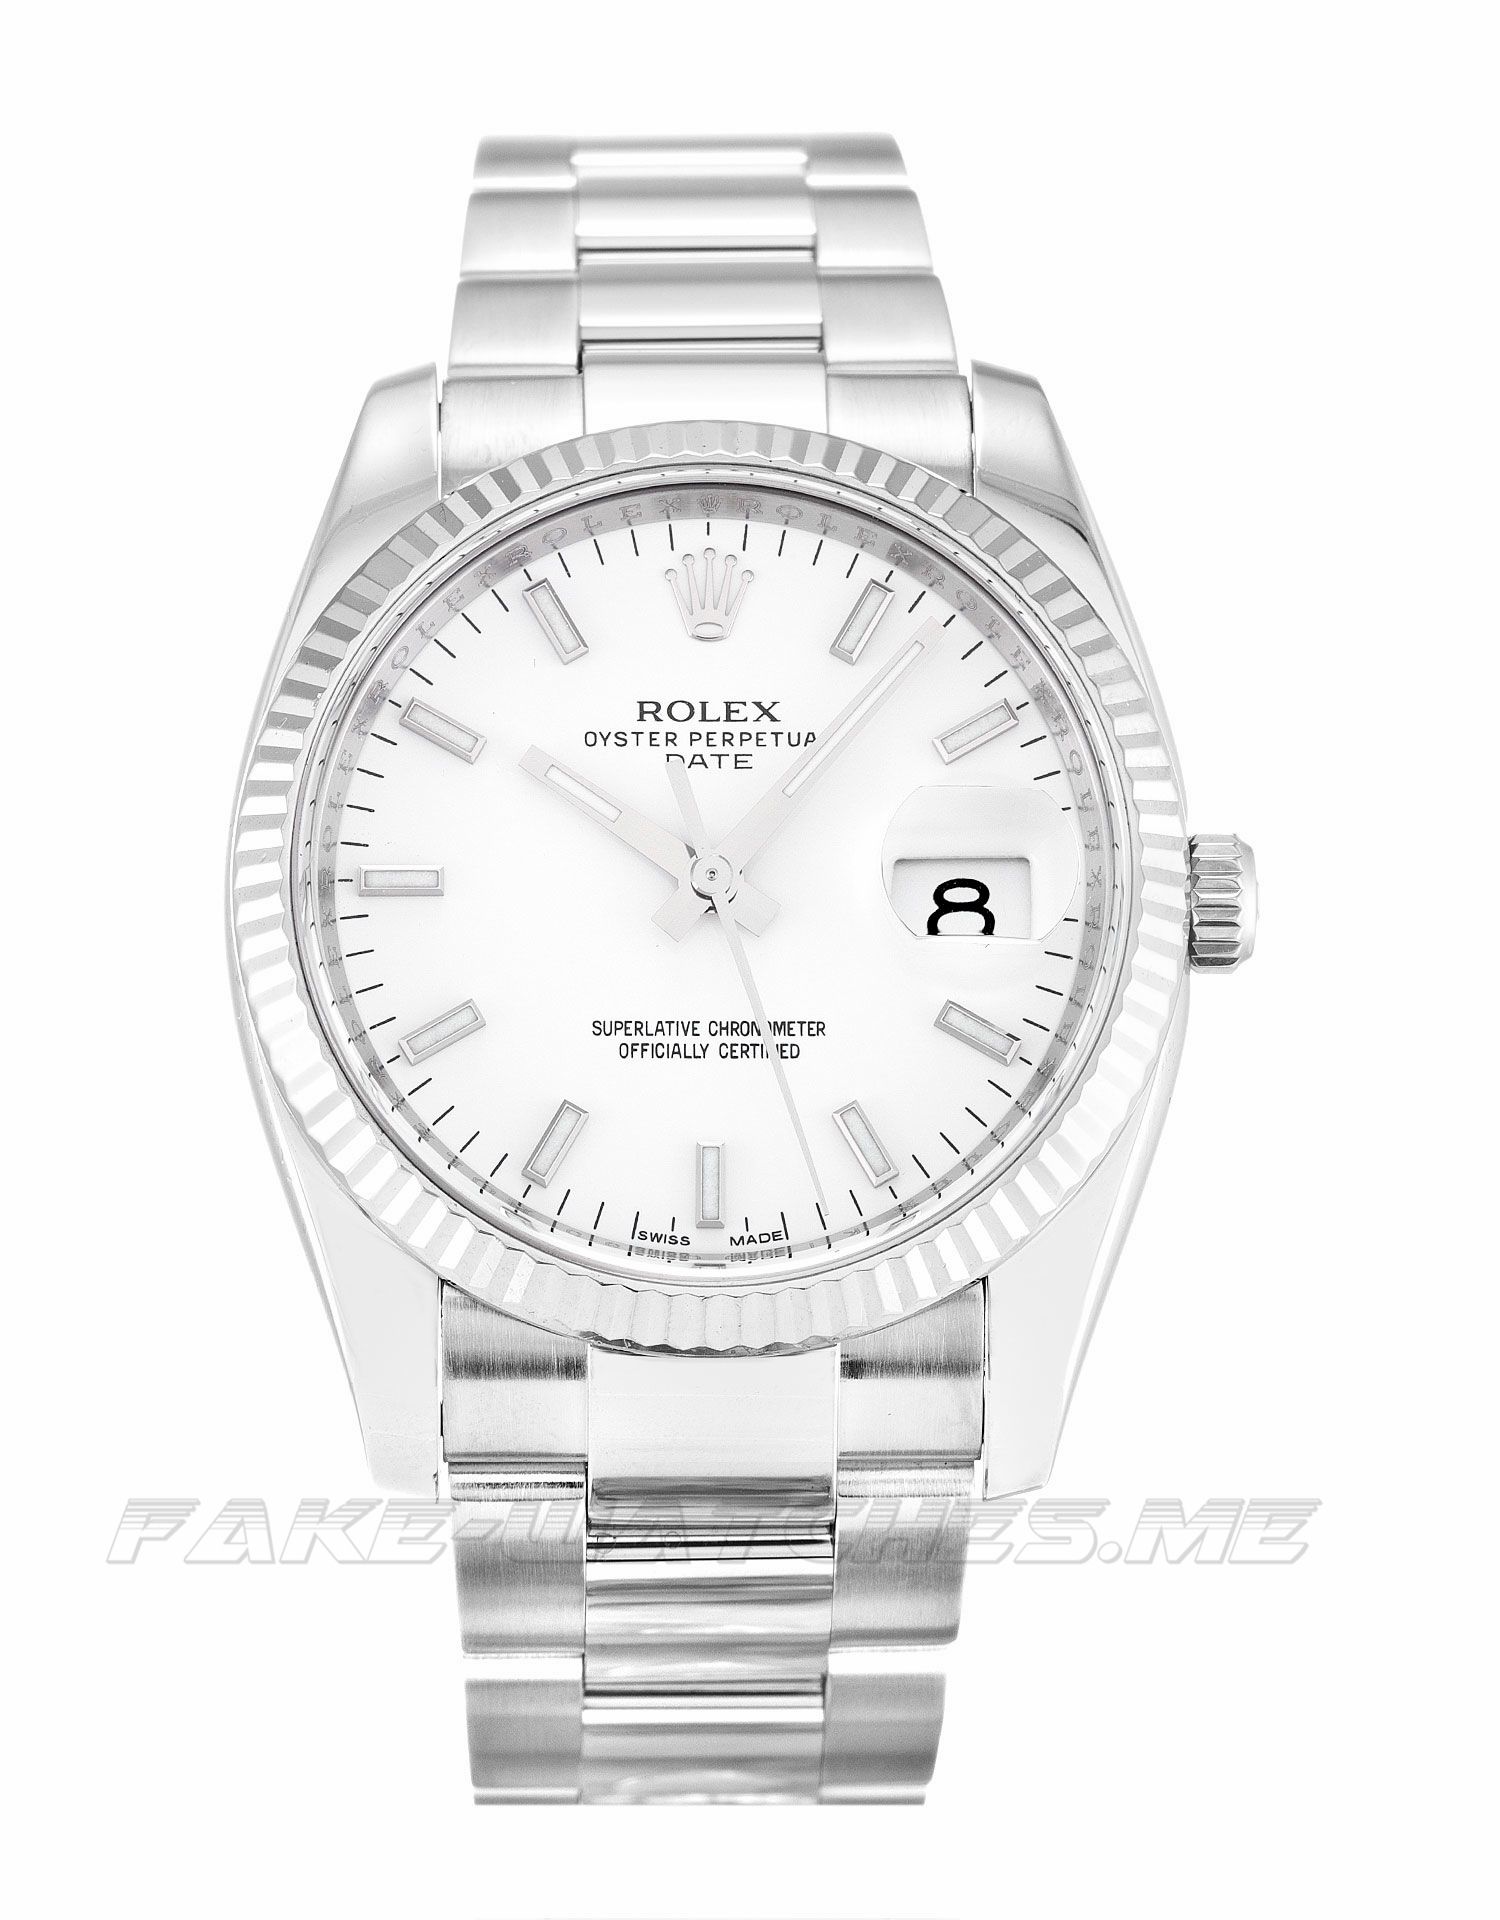 Rolex Oyster Perpetual Date Unisex Automatic 115234